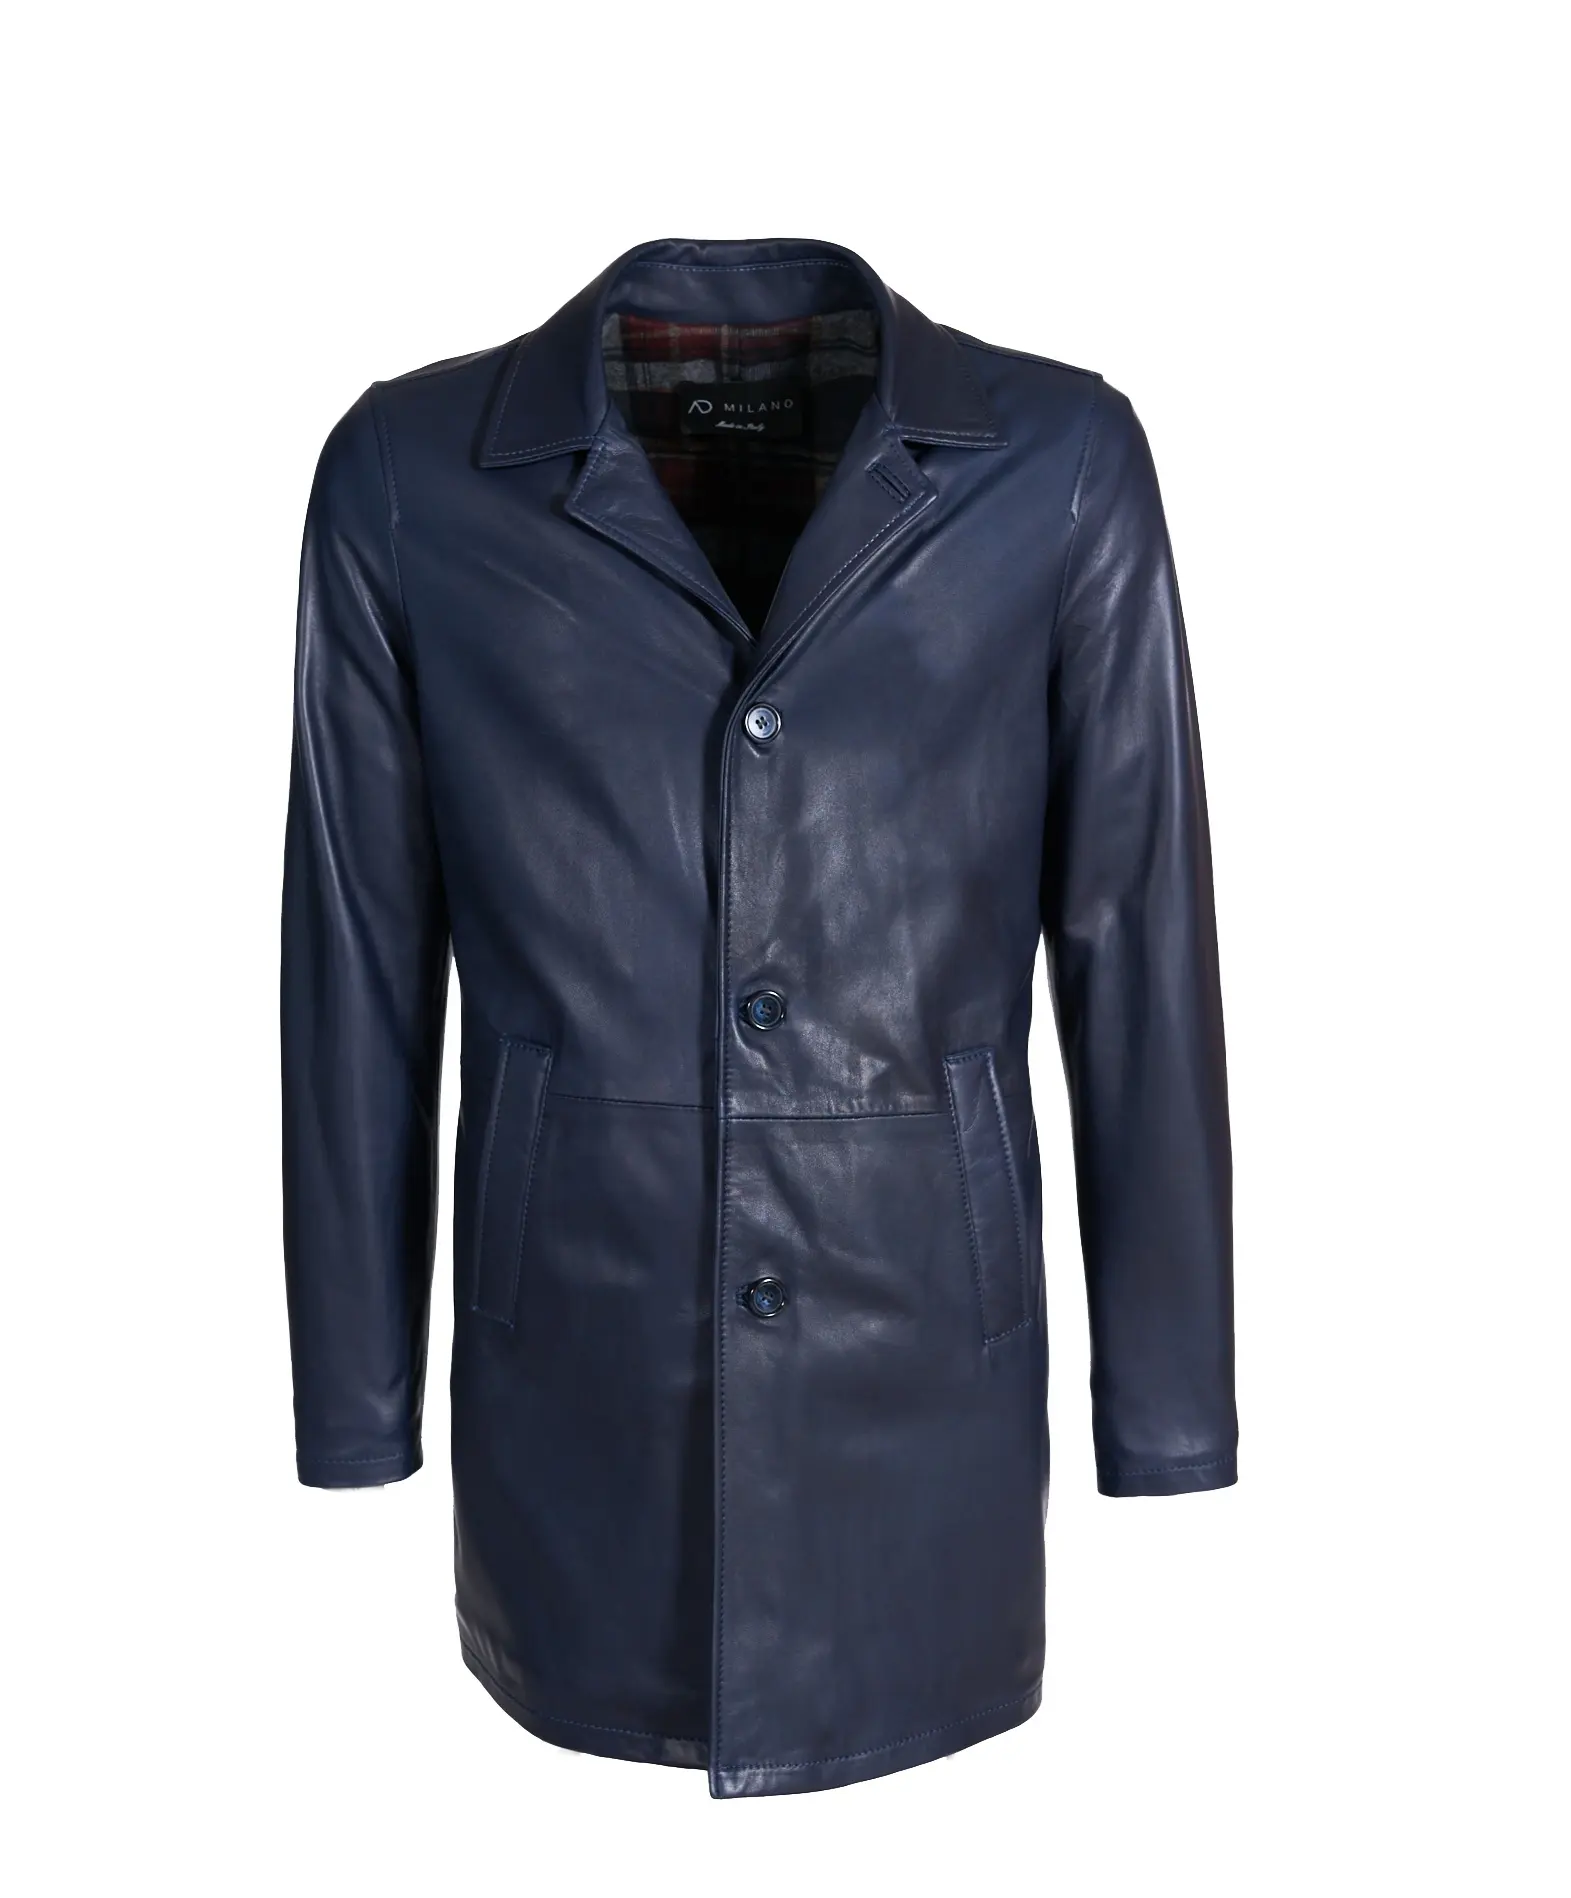 Made in Italy blue leather coat for men OEM service high quality 100% Italian real leather jacket winter clothes for daily wear